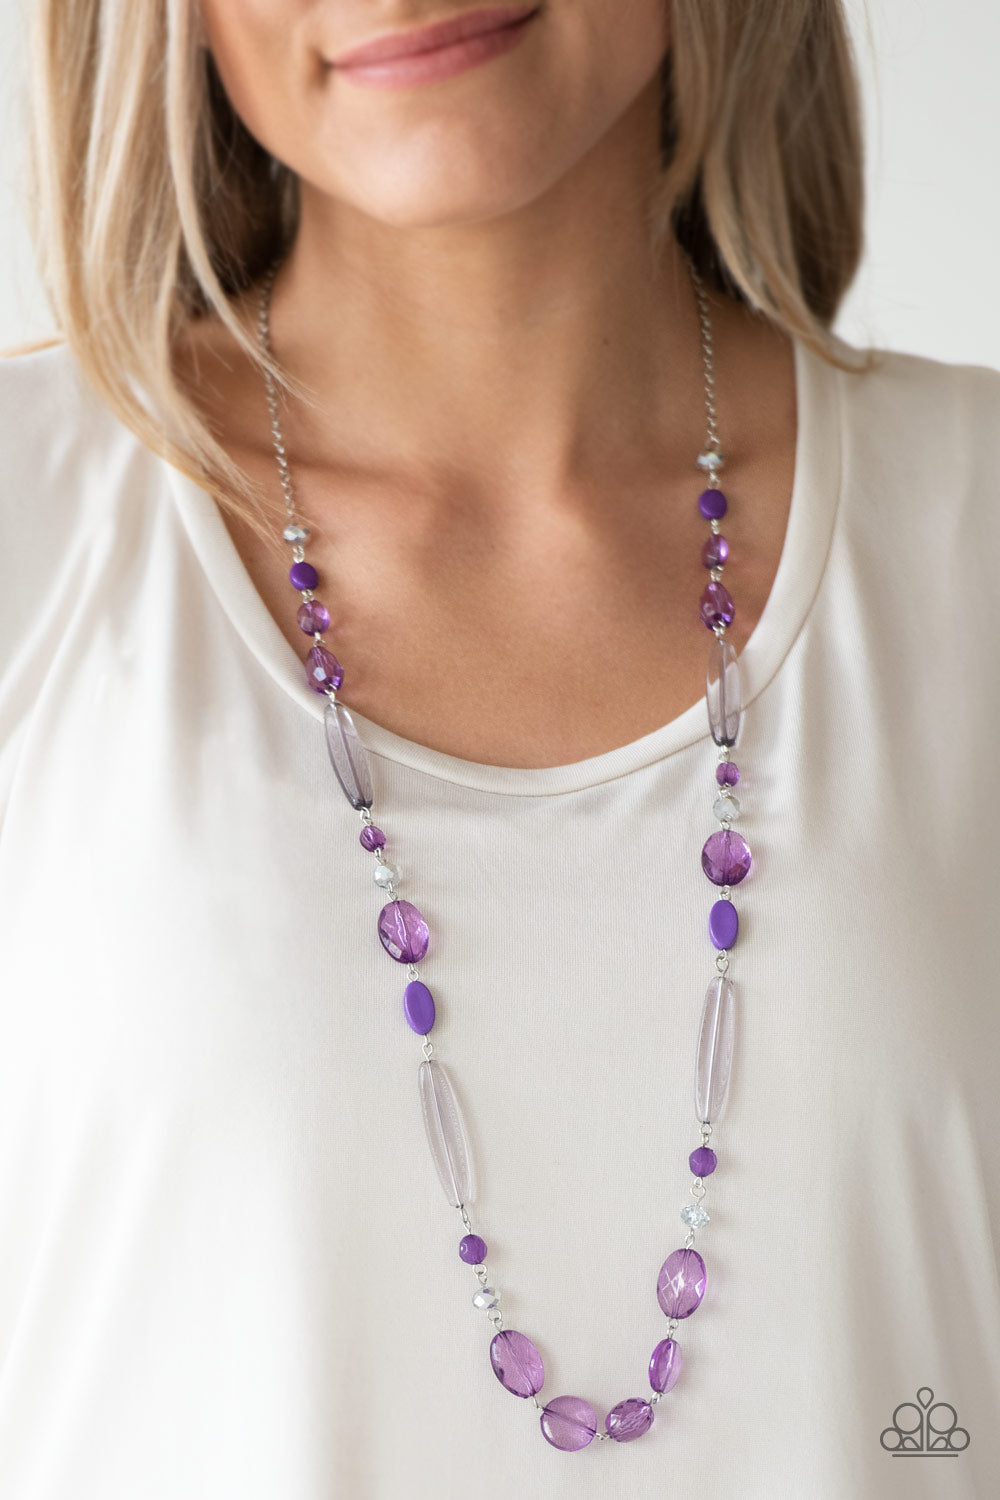 Paparazzi Quite Quintessence - Purple - Necklace and matching Earrings - $5 Jewelry With Ashley Swint